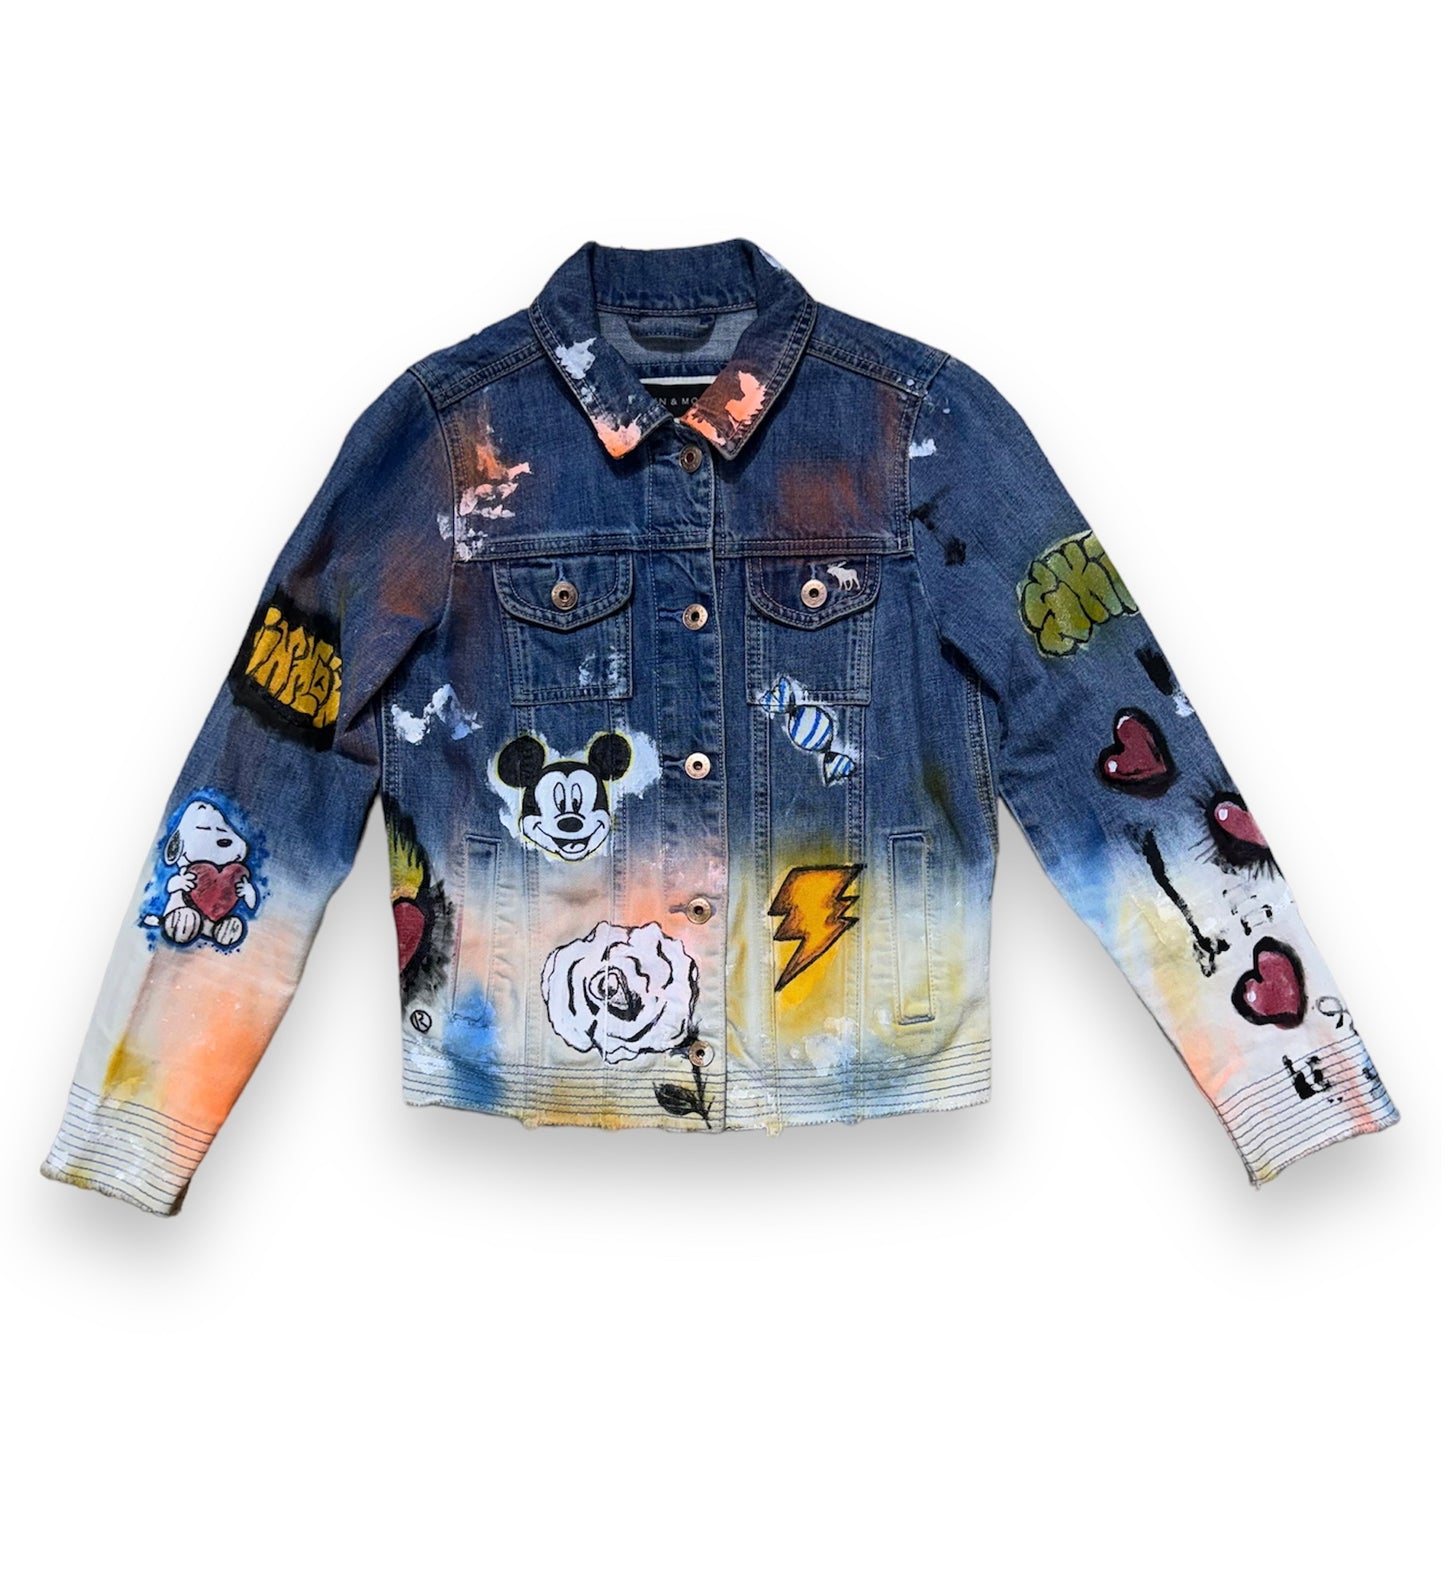 woman jeans jacket dreaming